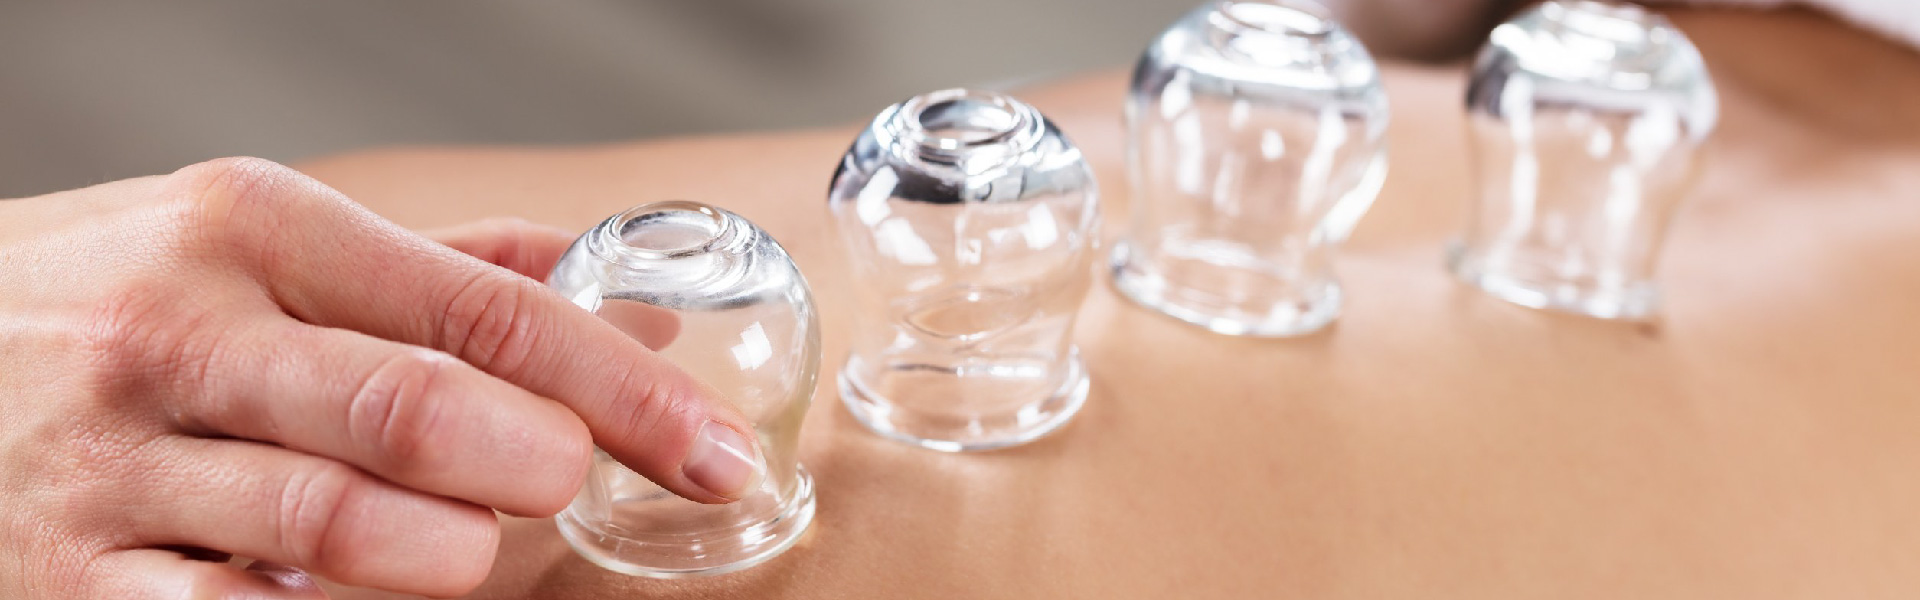 Cupping Therapy near Winter Park Florida